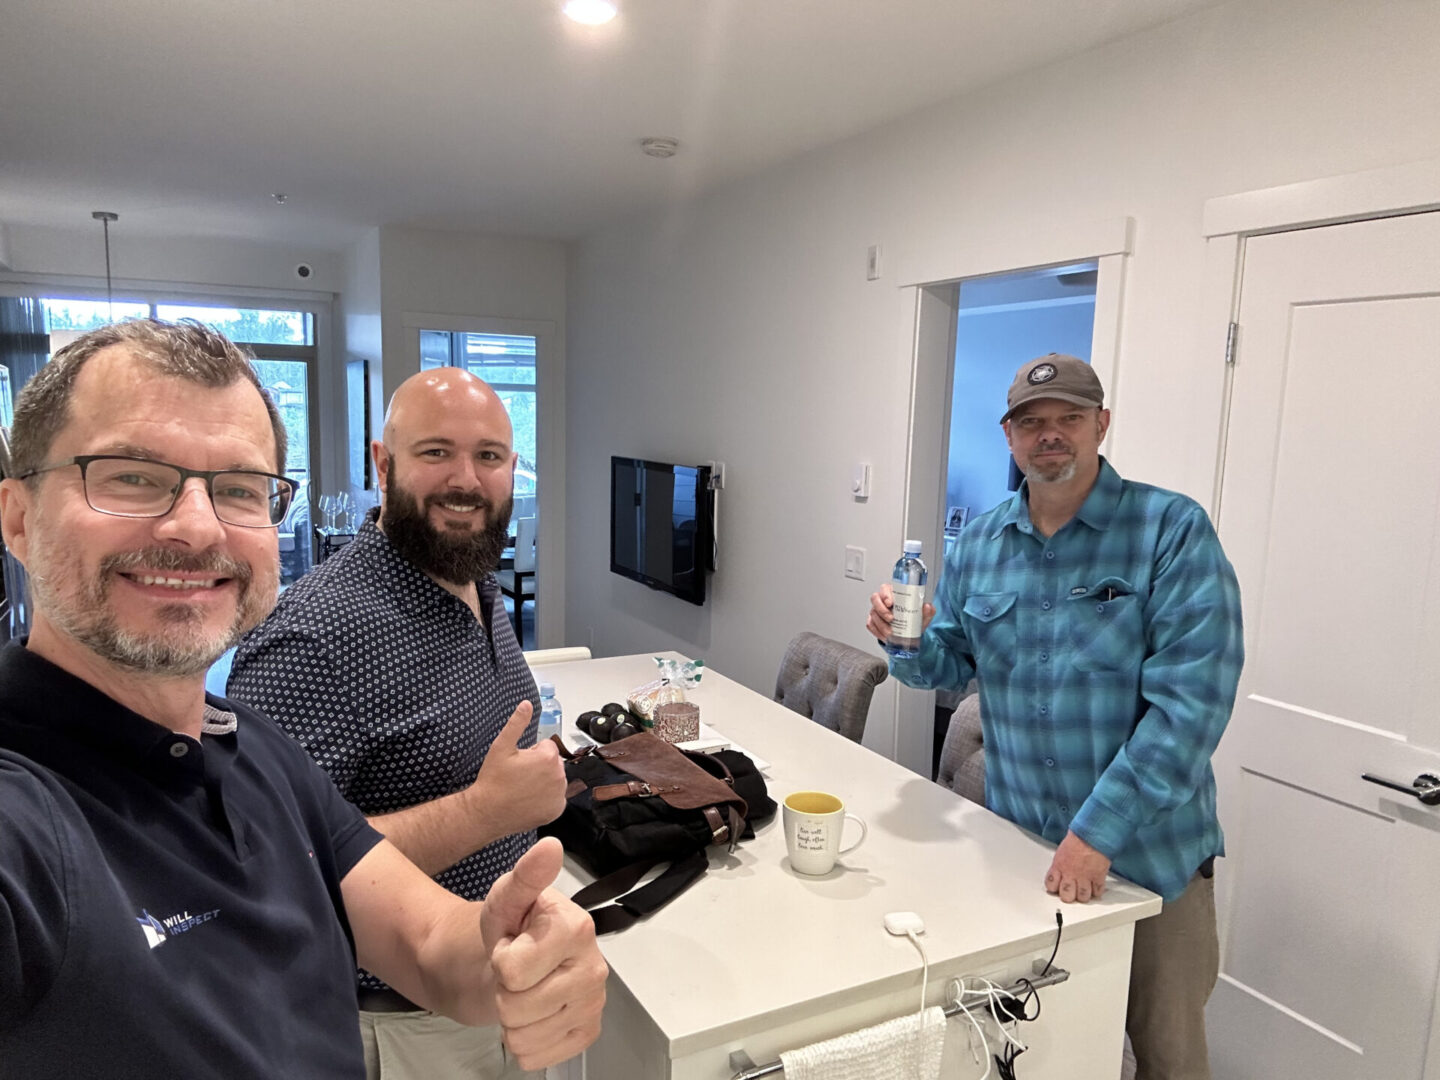 Three men are standing in a kitchen, smiling at the camera. One gives a thumbs-up, another holds a drink, and the table has various items like a mug and electronic devices.